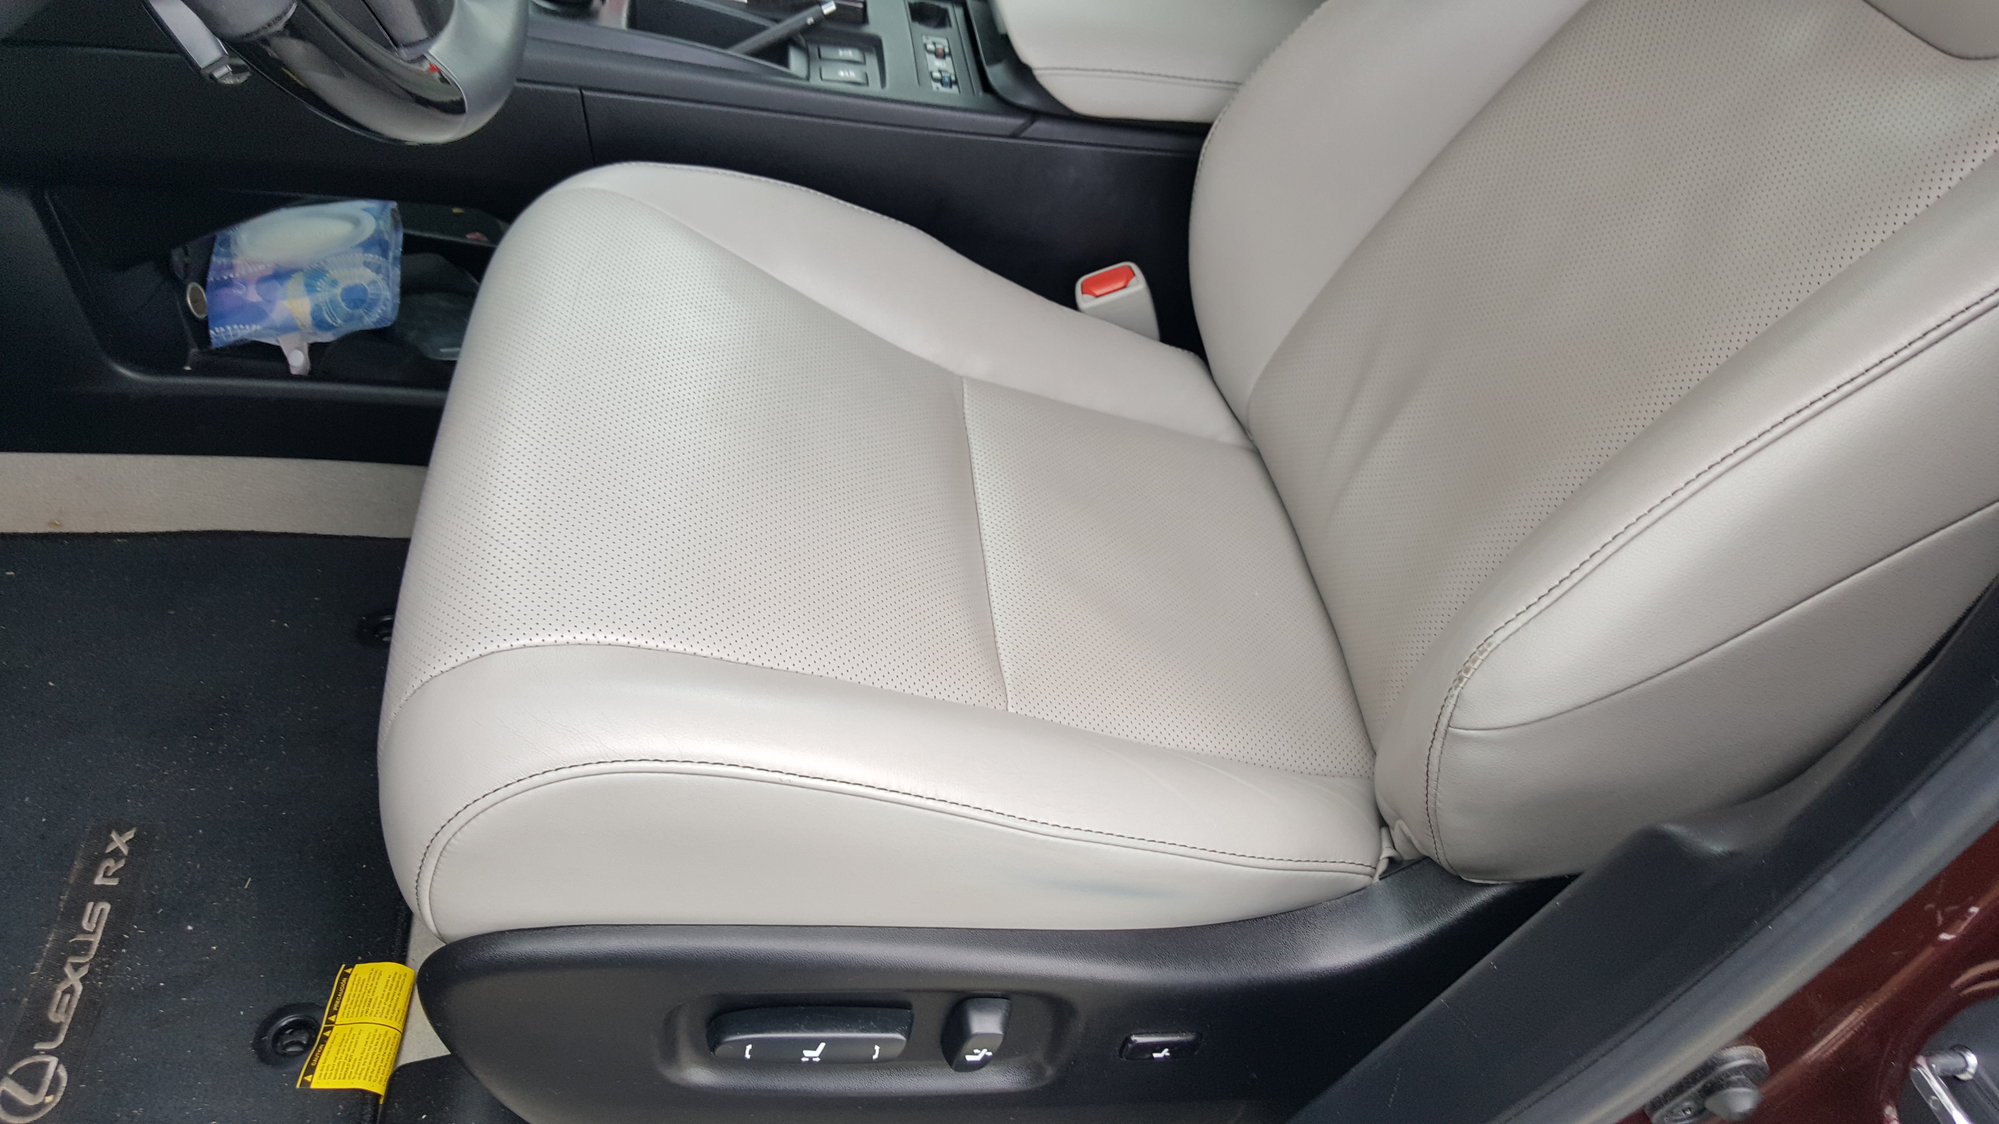 Best Leather Cleaner Conditioner For Lexus Interior Clublexus Forum Discussion - How To Clean Leather Seats In My Lexus